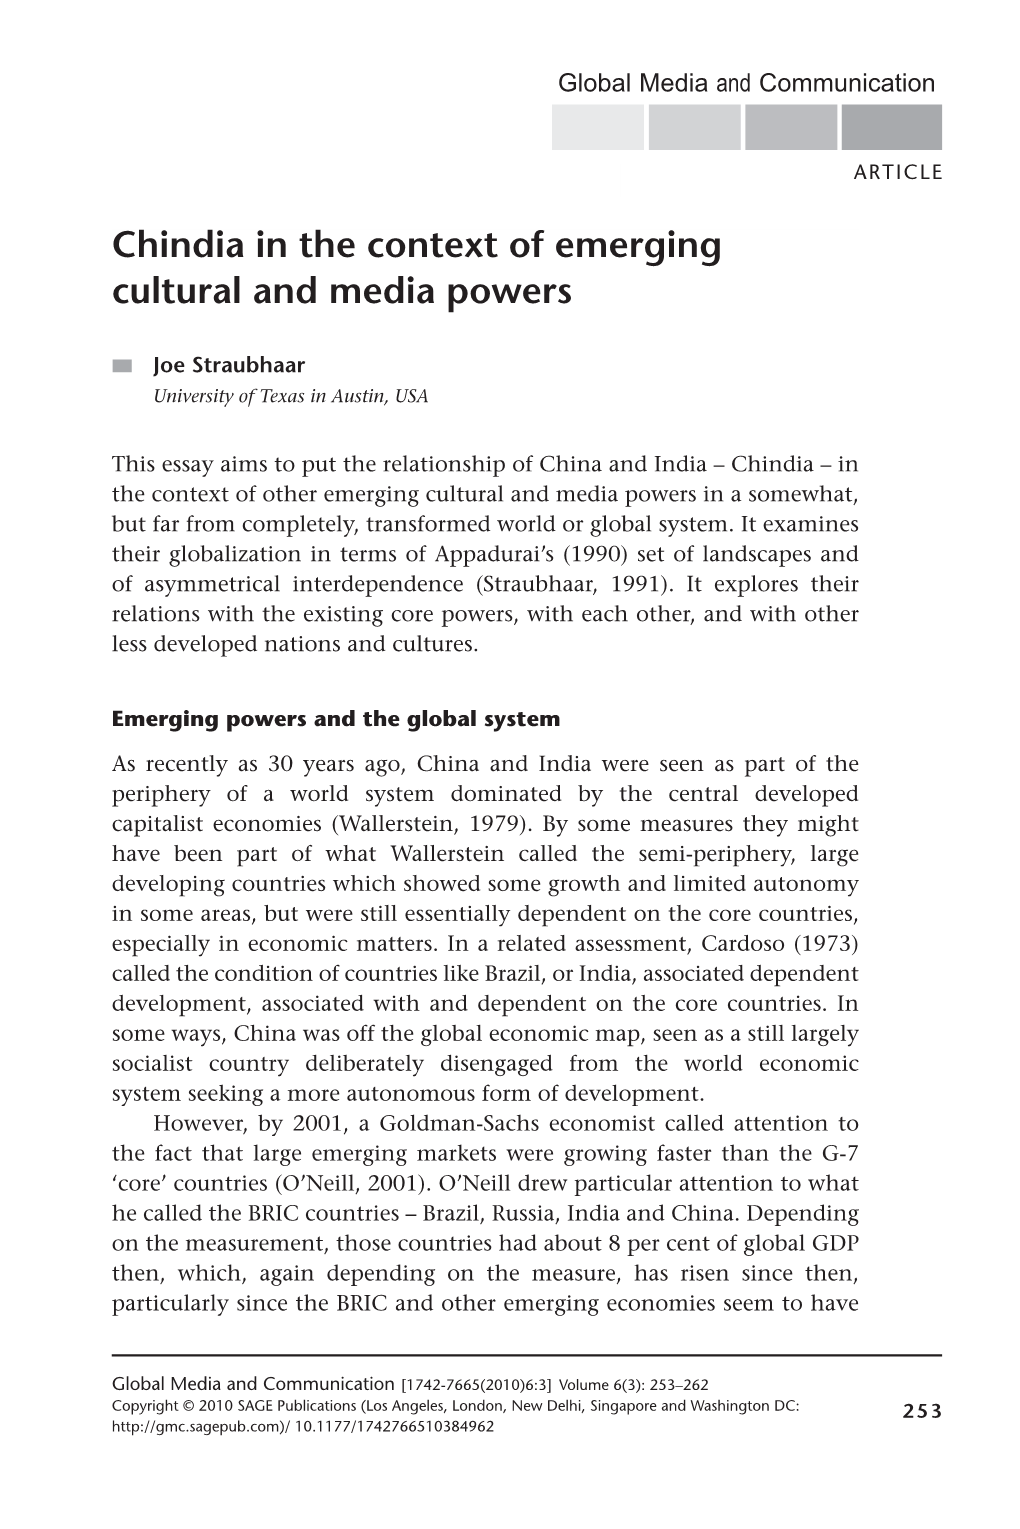 Chindia in the Context of Emerging Cultural and Media Powers